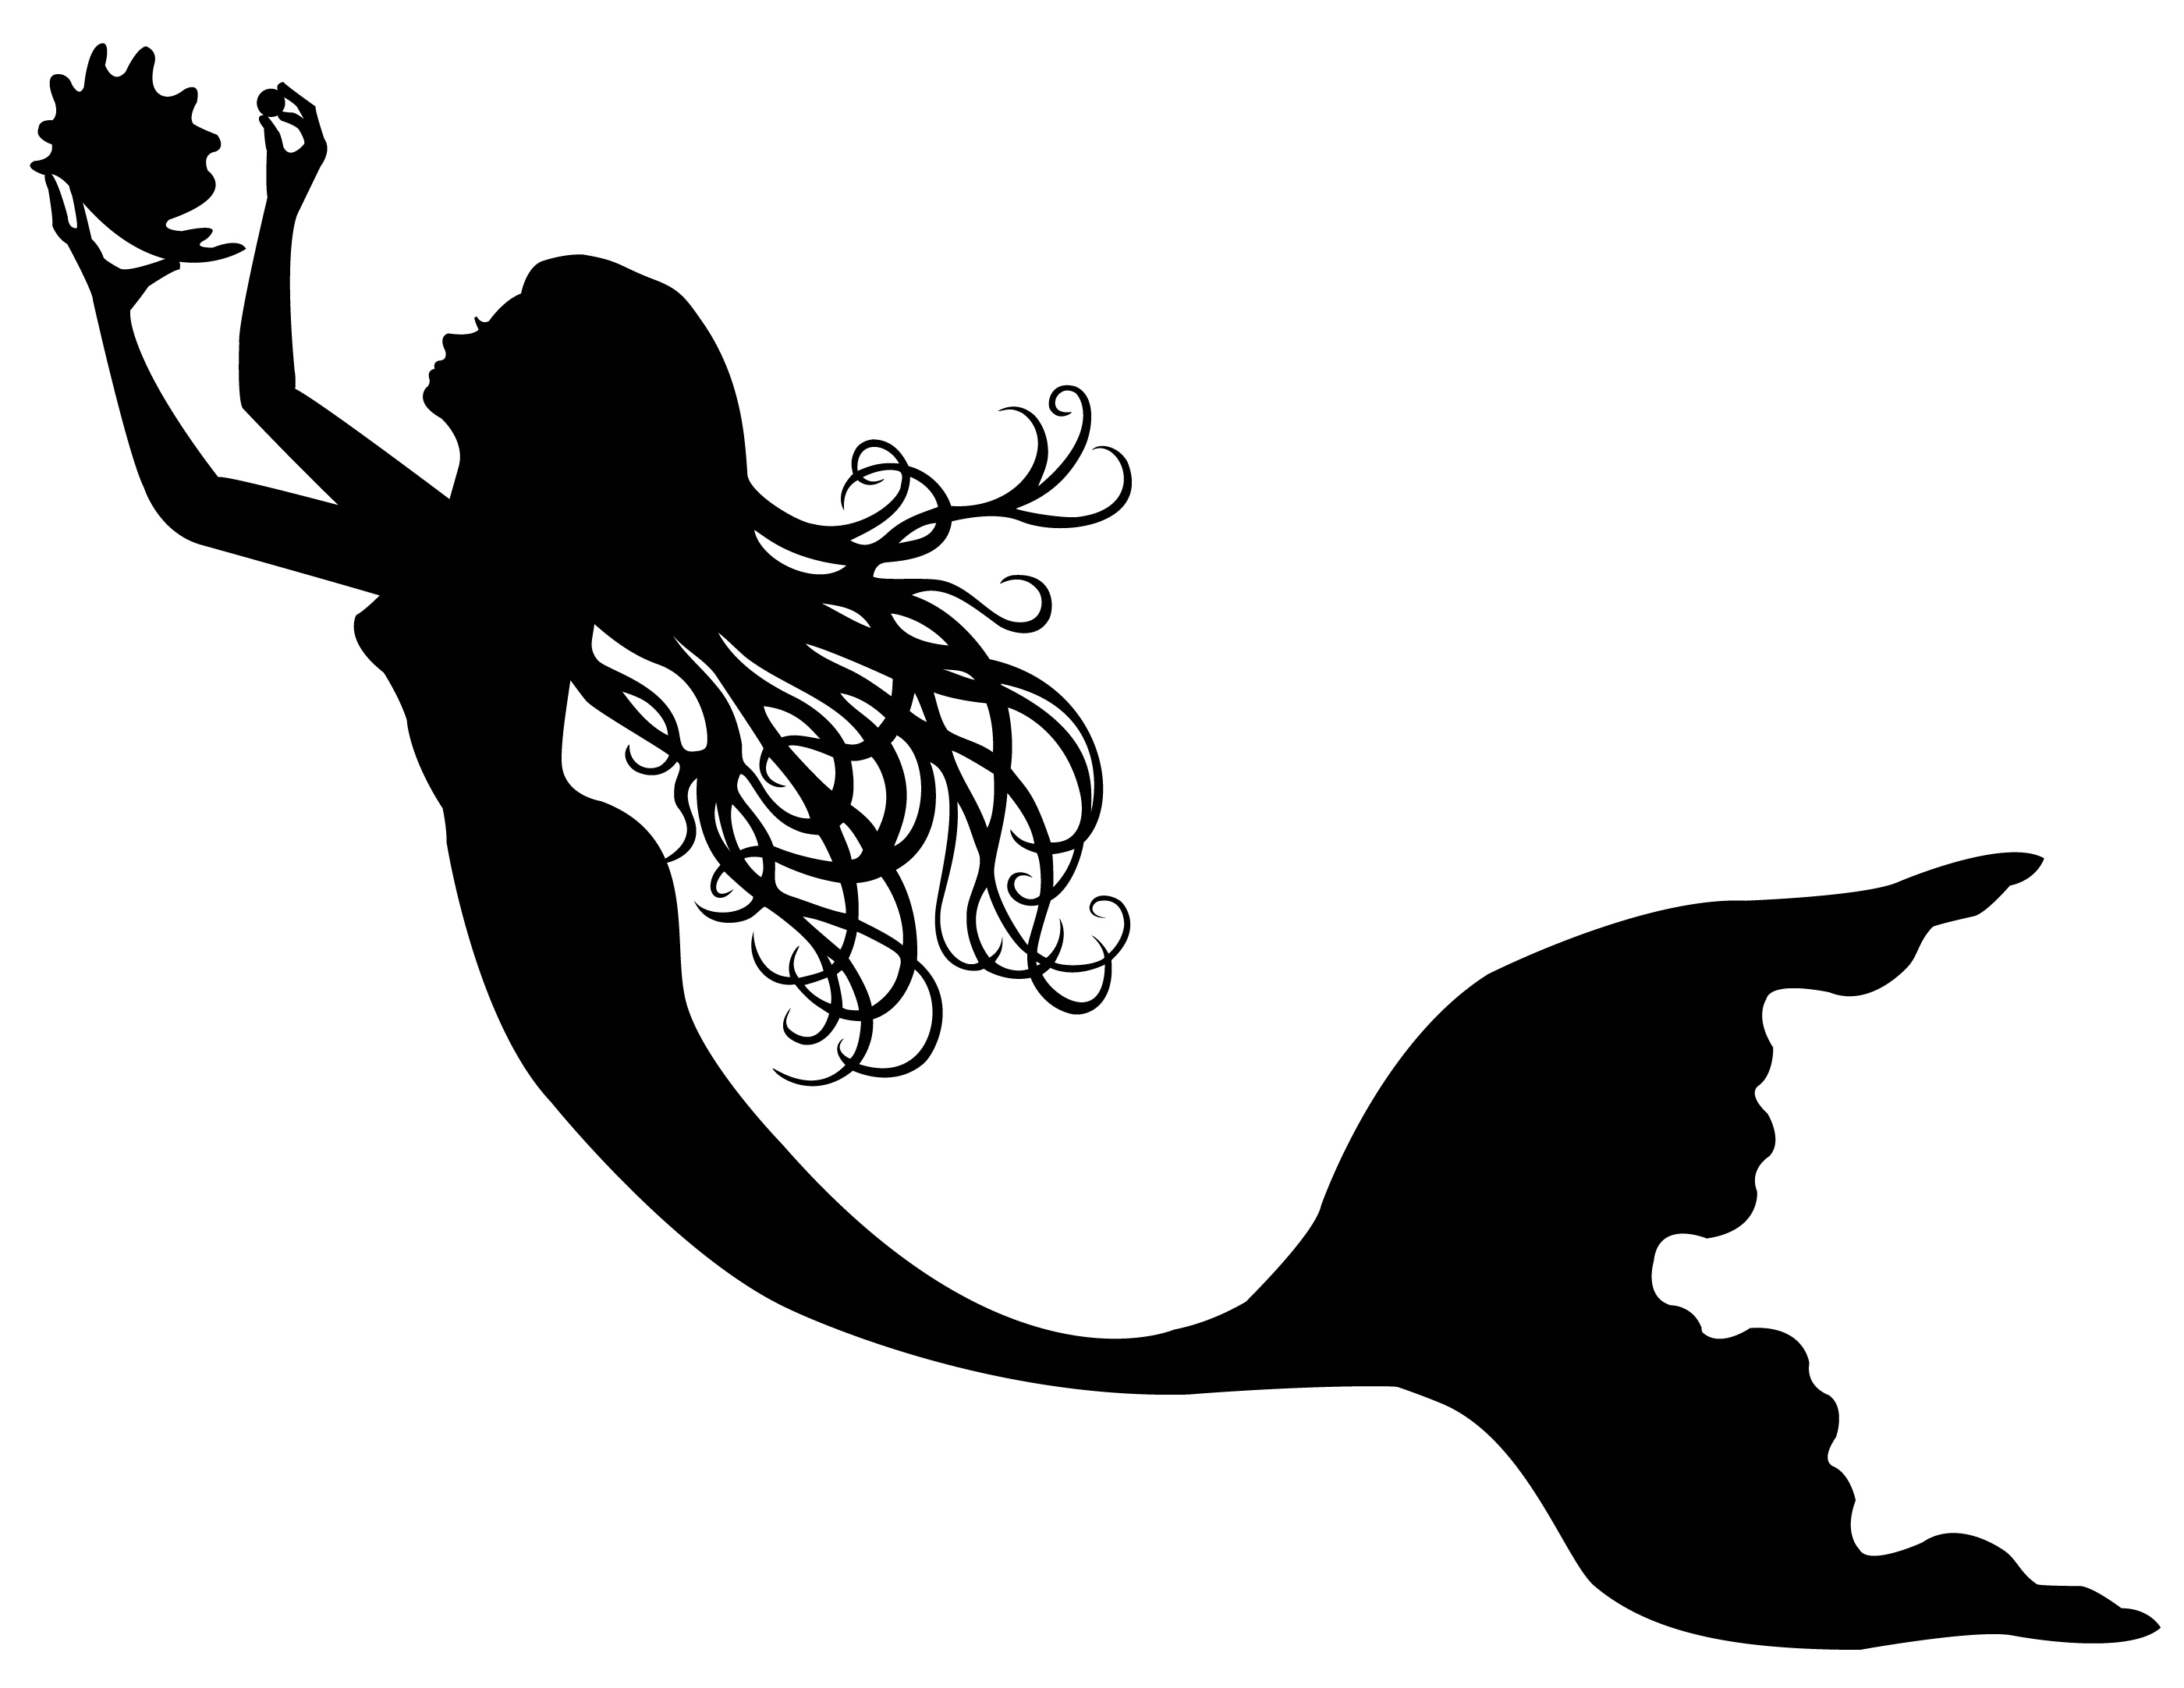 0 ideas about mermaid silhouette on little clipart 2